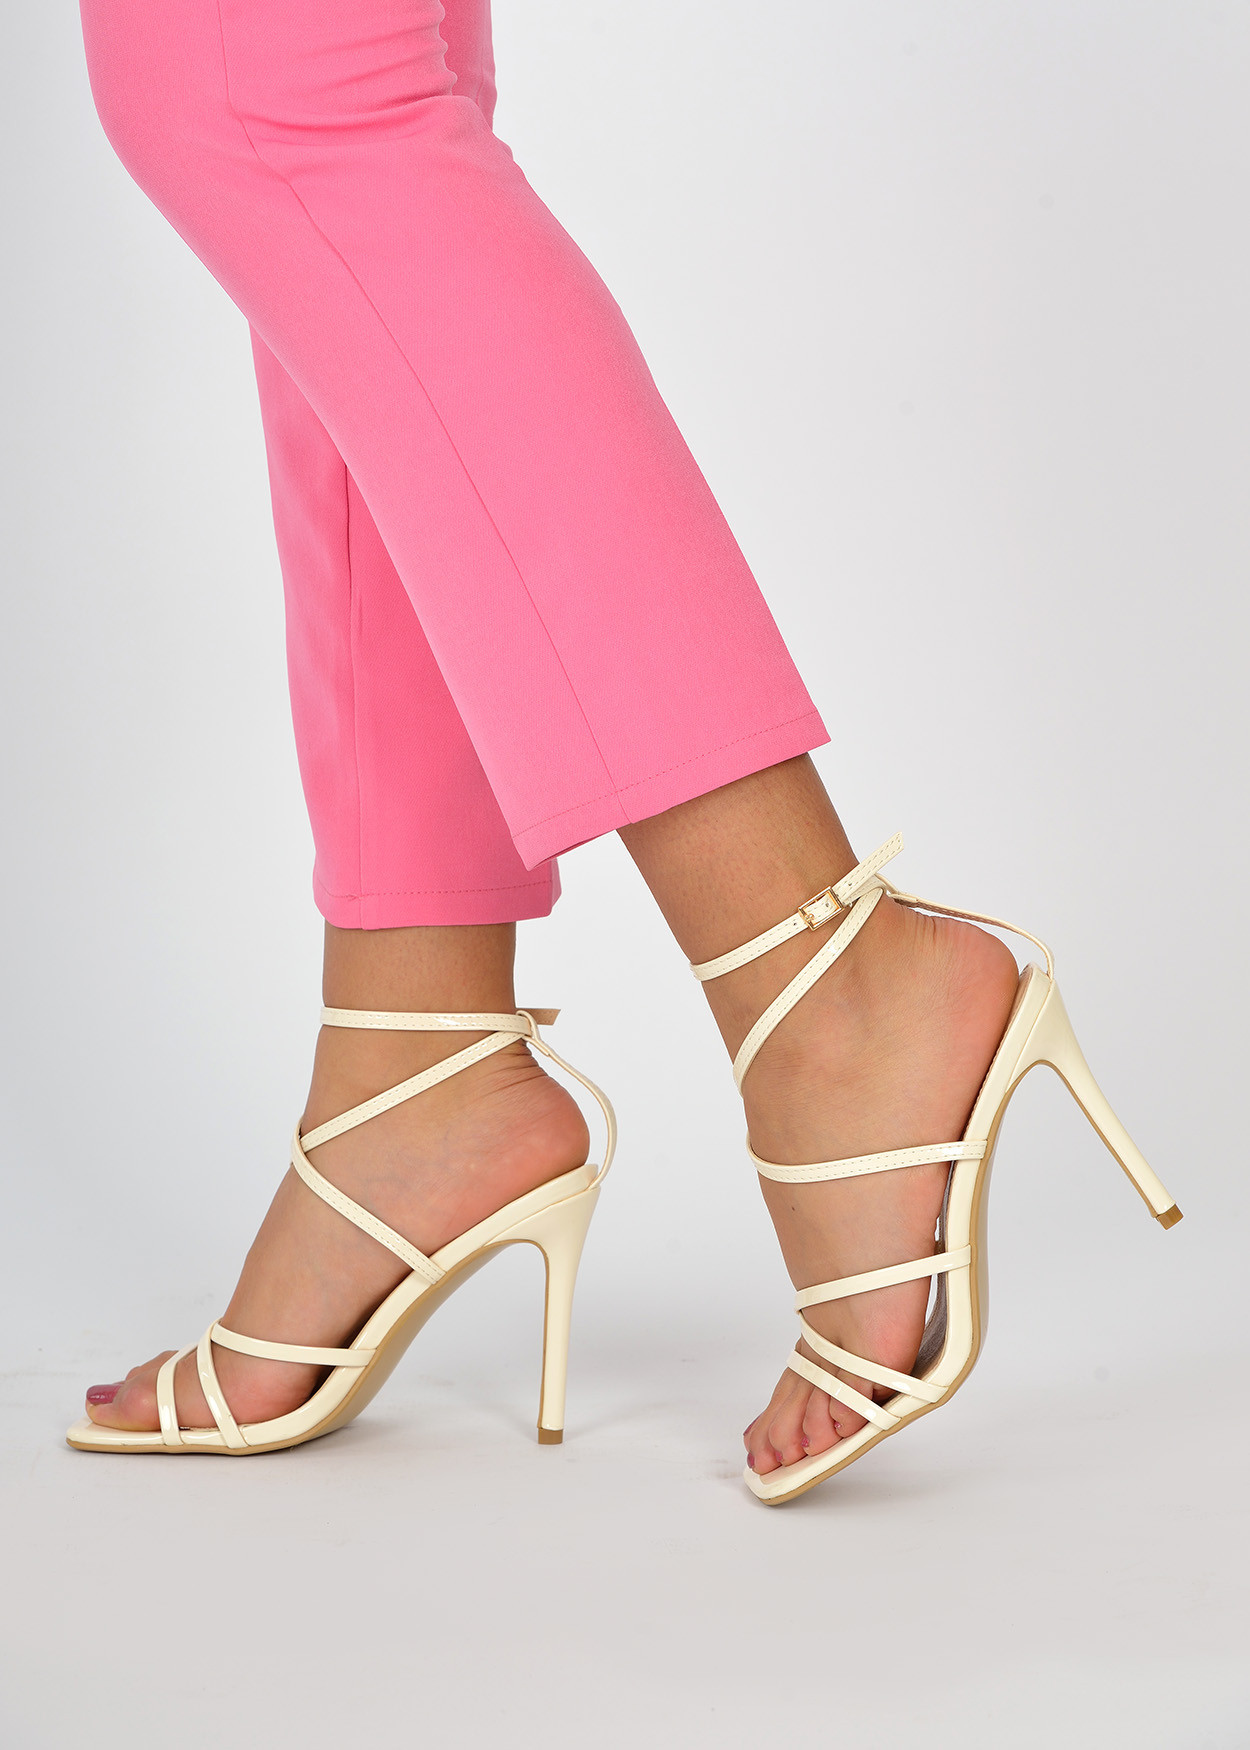 White Feather Pointed-Toe Sandals With A Gold Ankle Strap – ADONIS BOUTIQUE